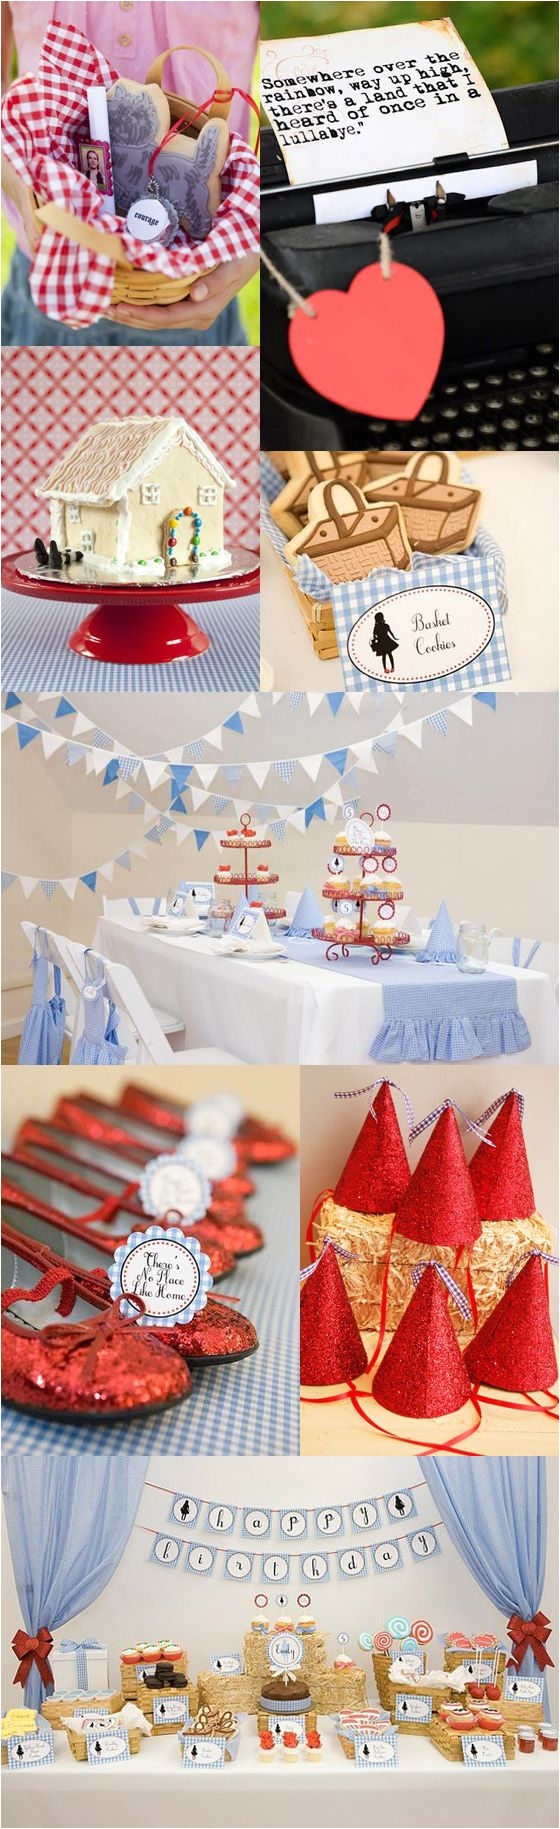 fun wizard of oz birthday party decoration ideas oh dear lord melissa wilson this is